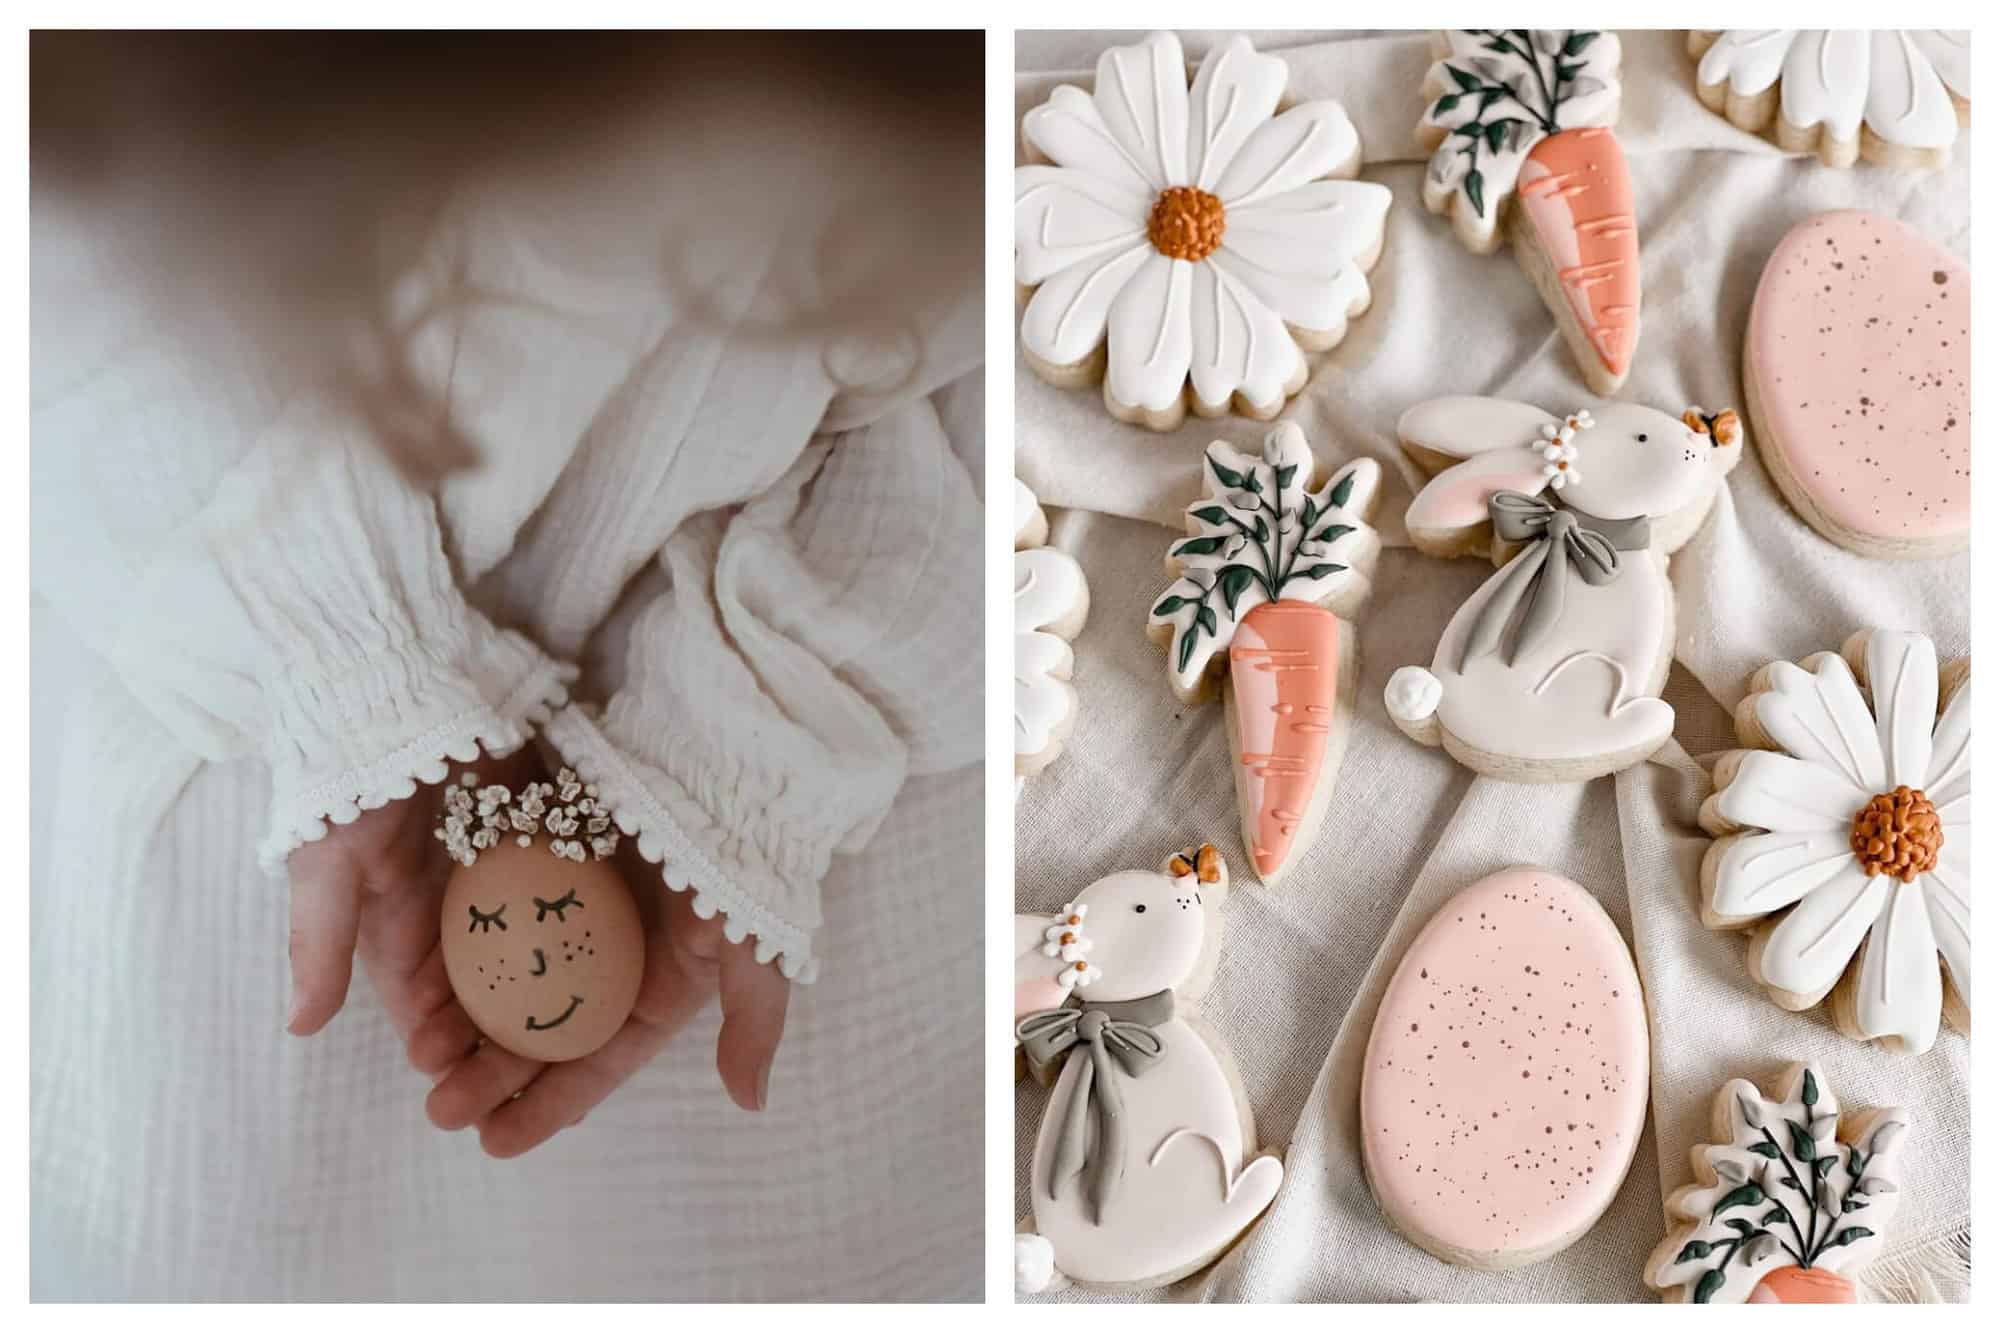 Left- A young girl in a muslin dressing gown holds a easter egg, with a decorated face. Right- Gourmet Easter cookies are decorated as bunnies, carrots, and daisies. 